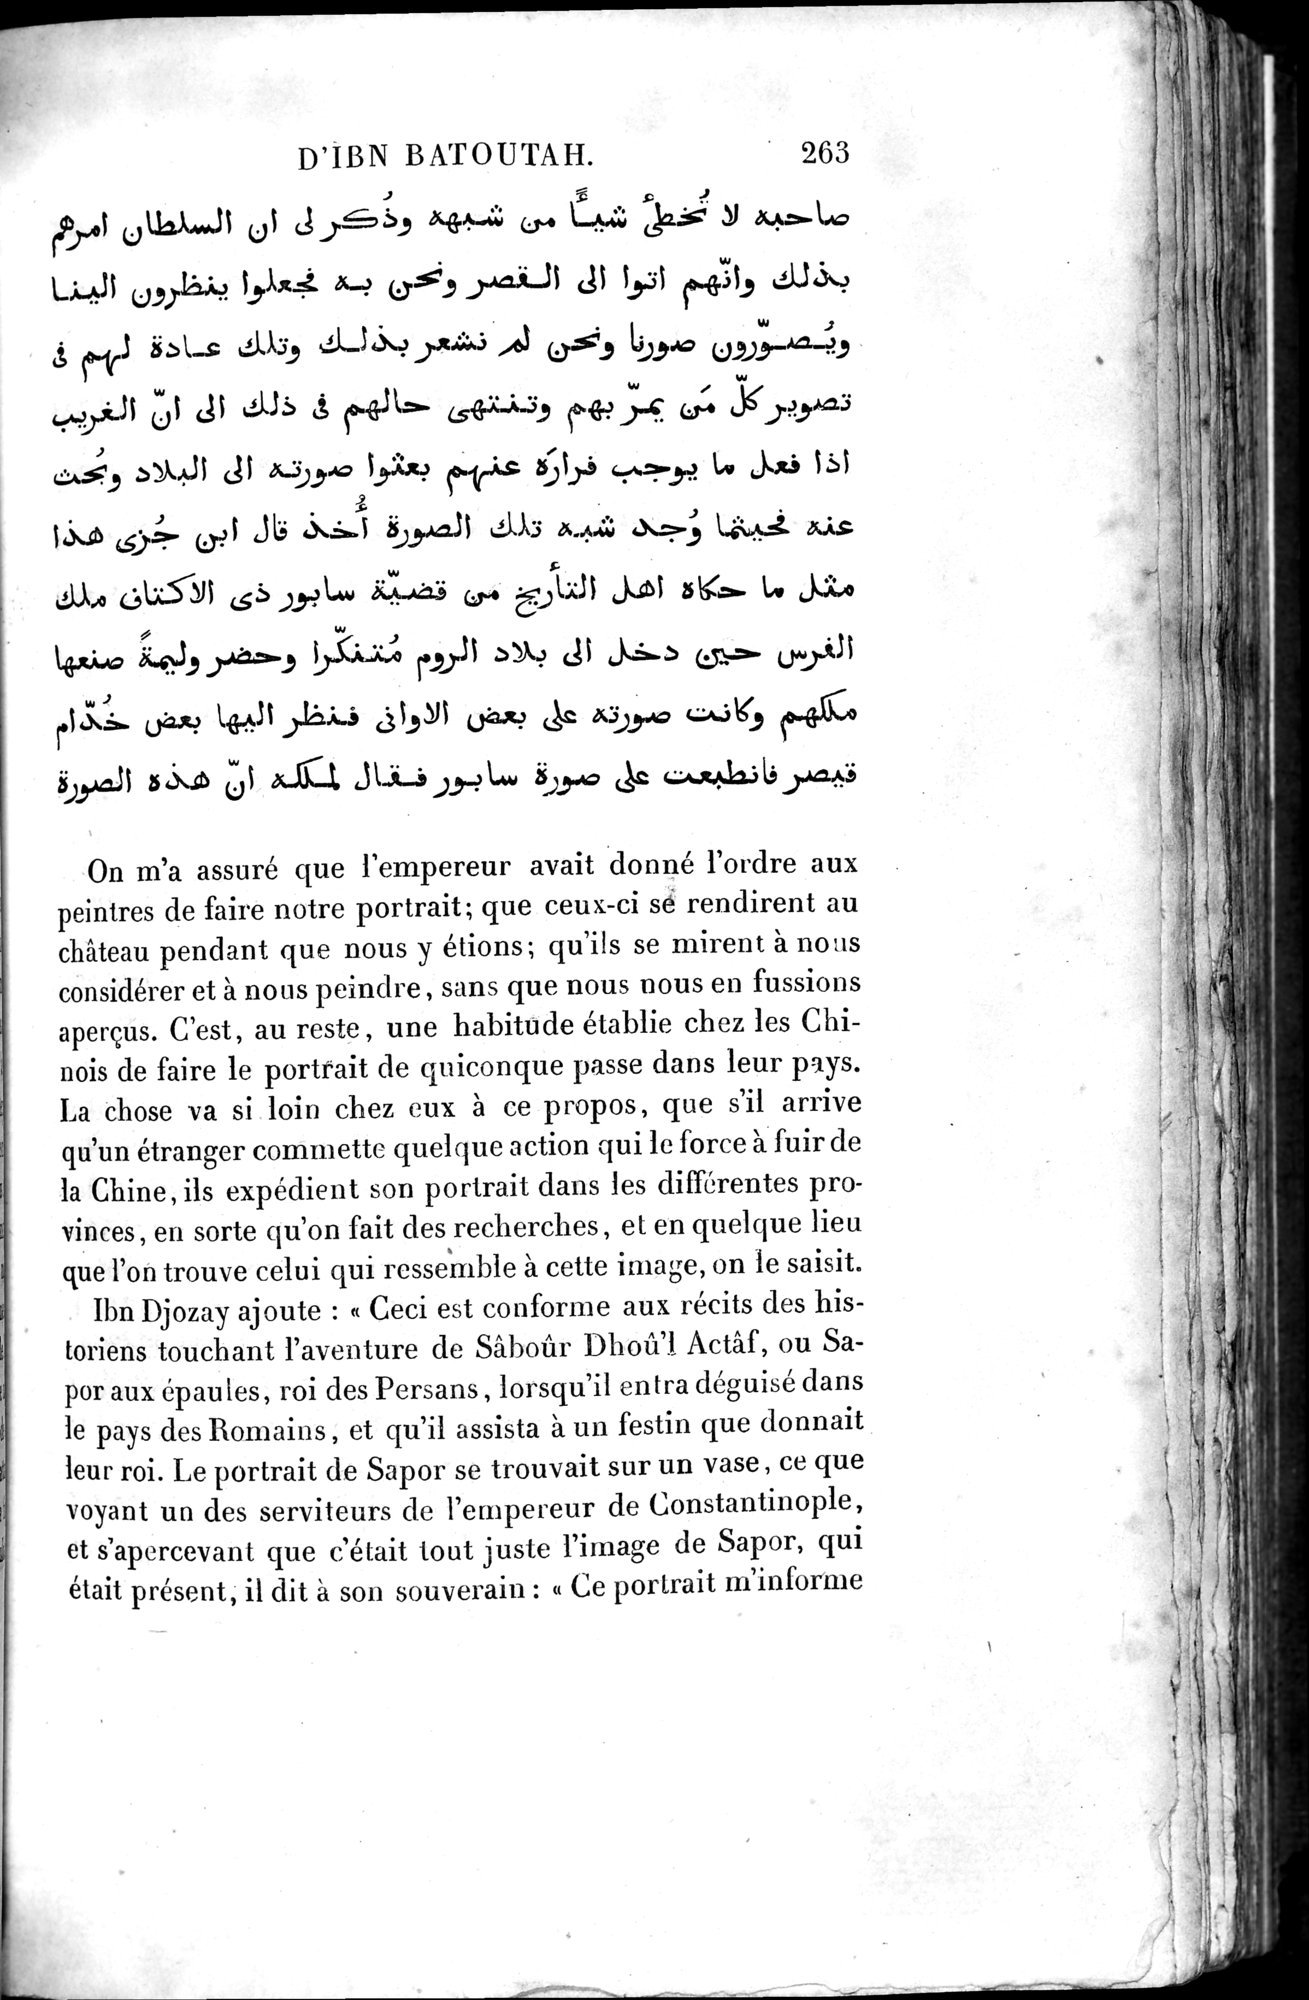 Voyages d'Ibn Batoutah : vol.4 / Page 275 (Grayscale High Resolution Image)